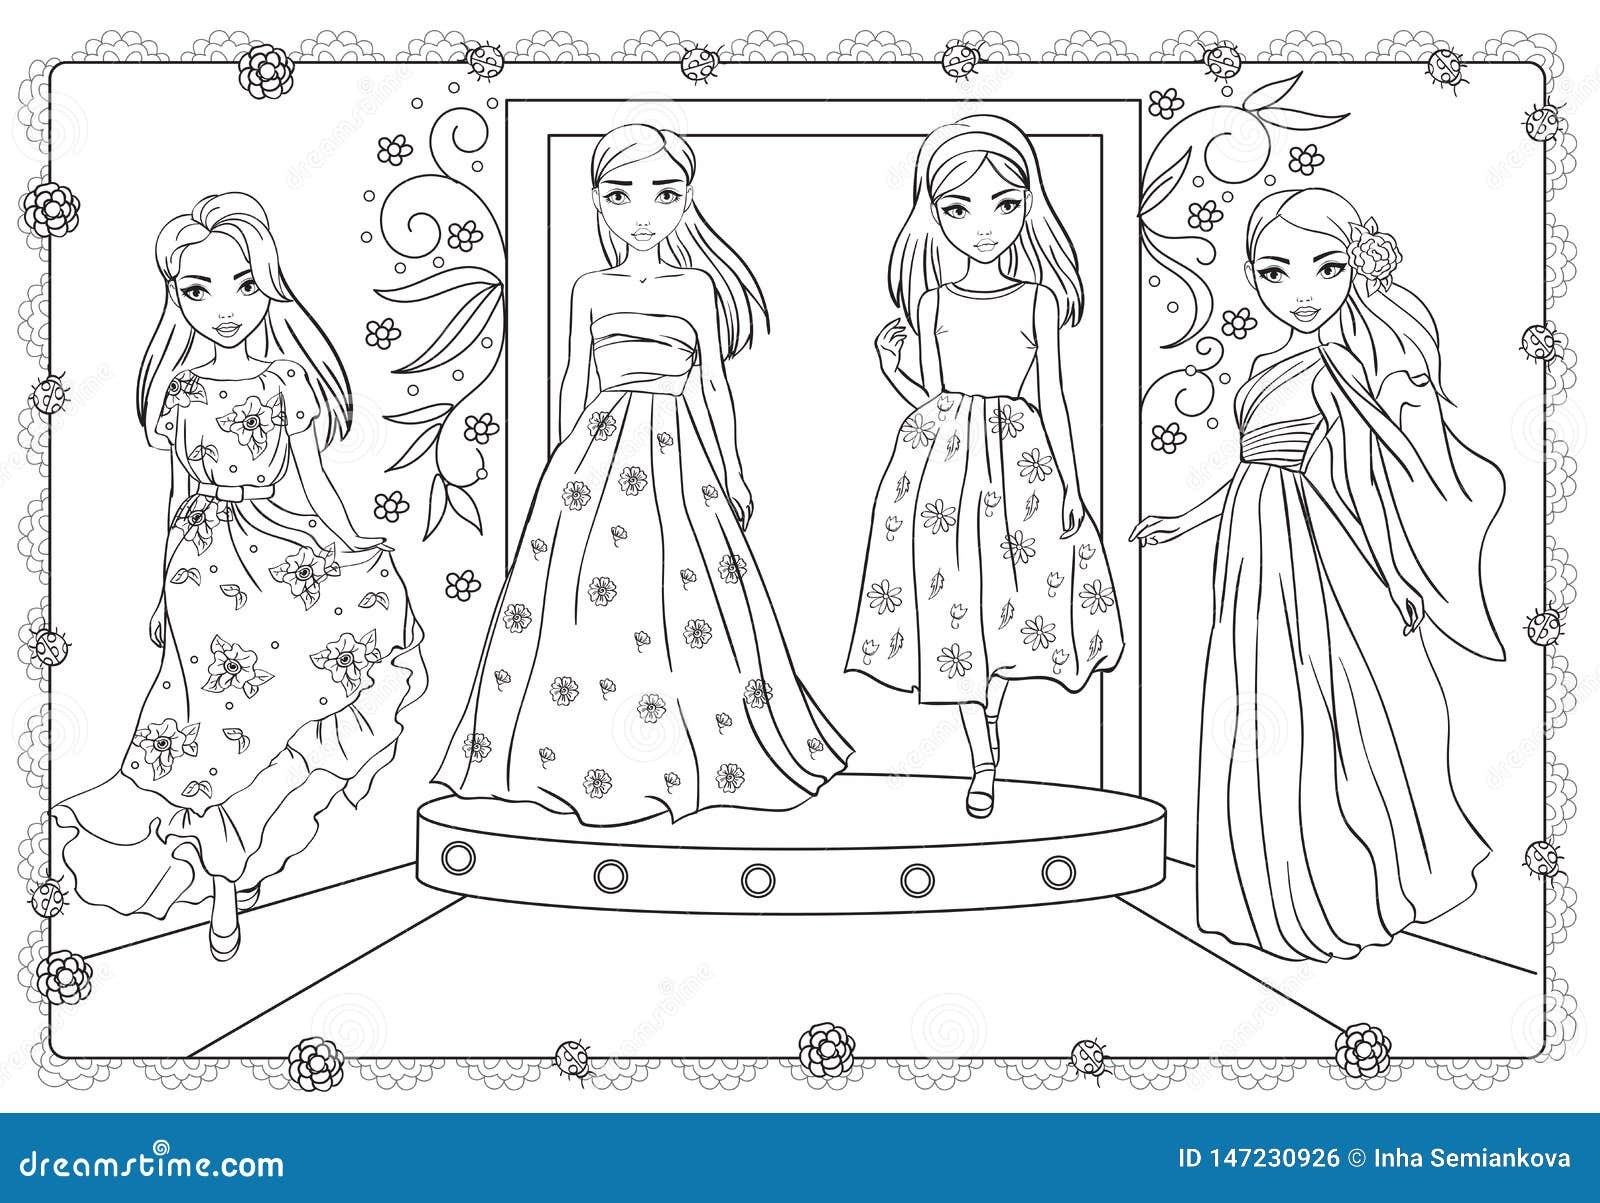 barbie fashion coloring pages